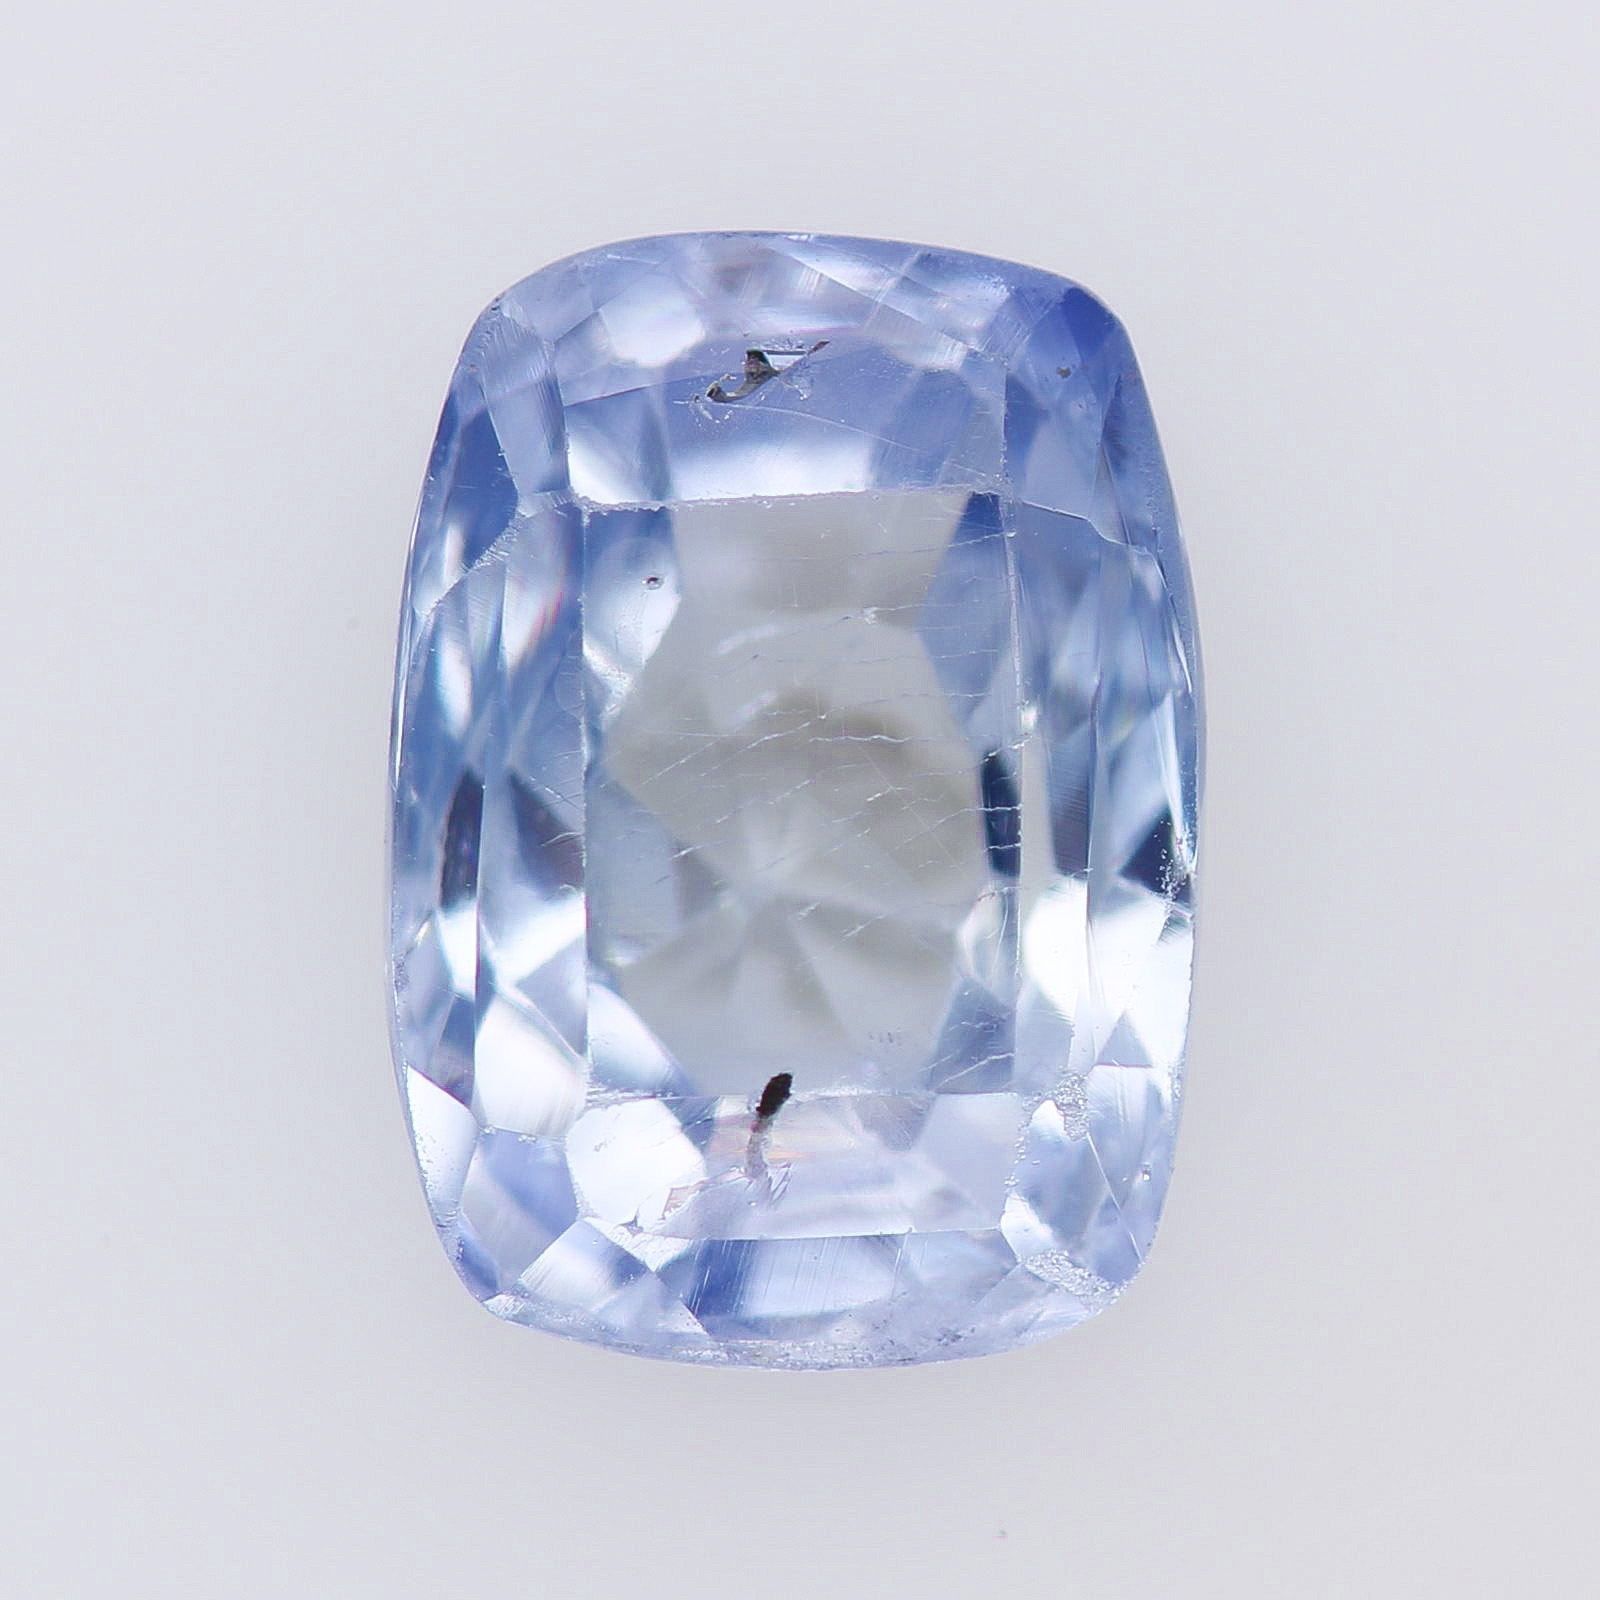 Periwinkle Gemstone - A Unique Shade Of Beauty